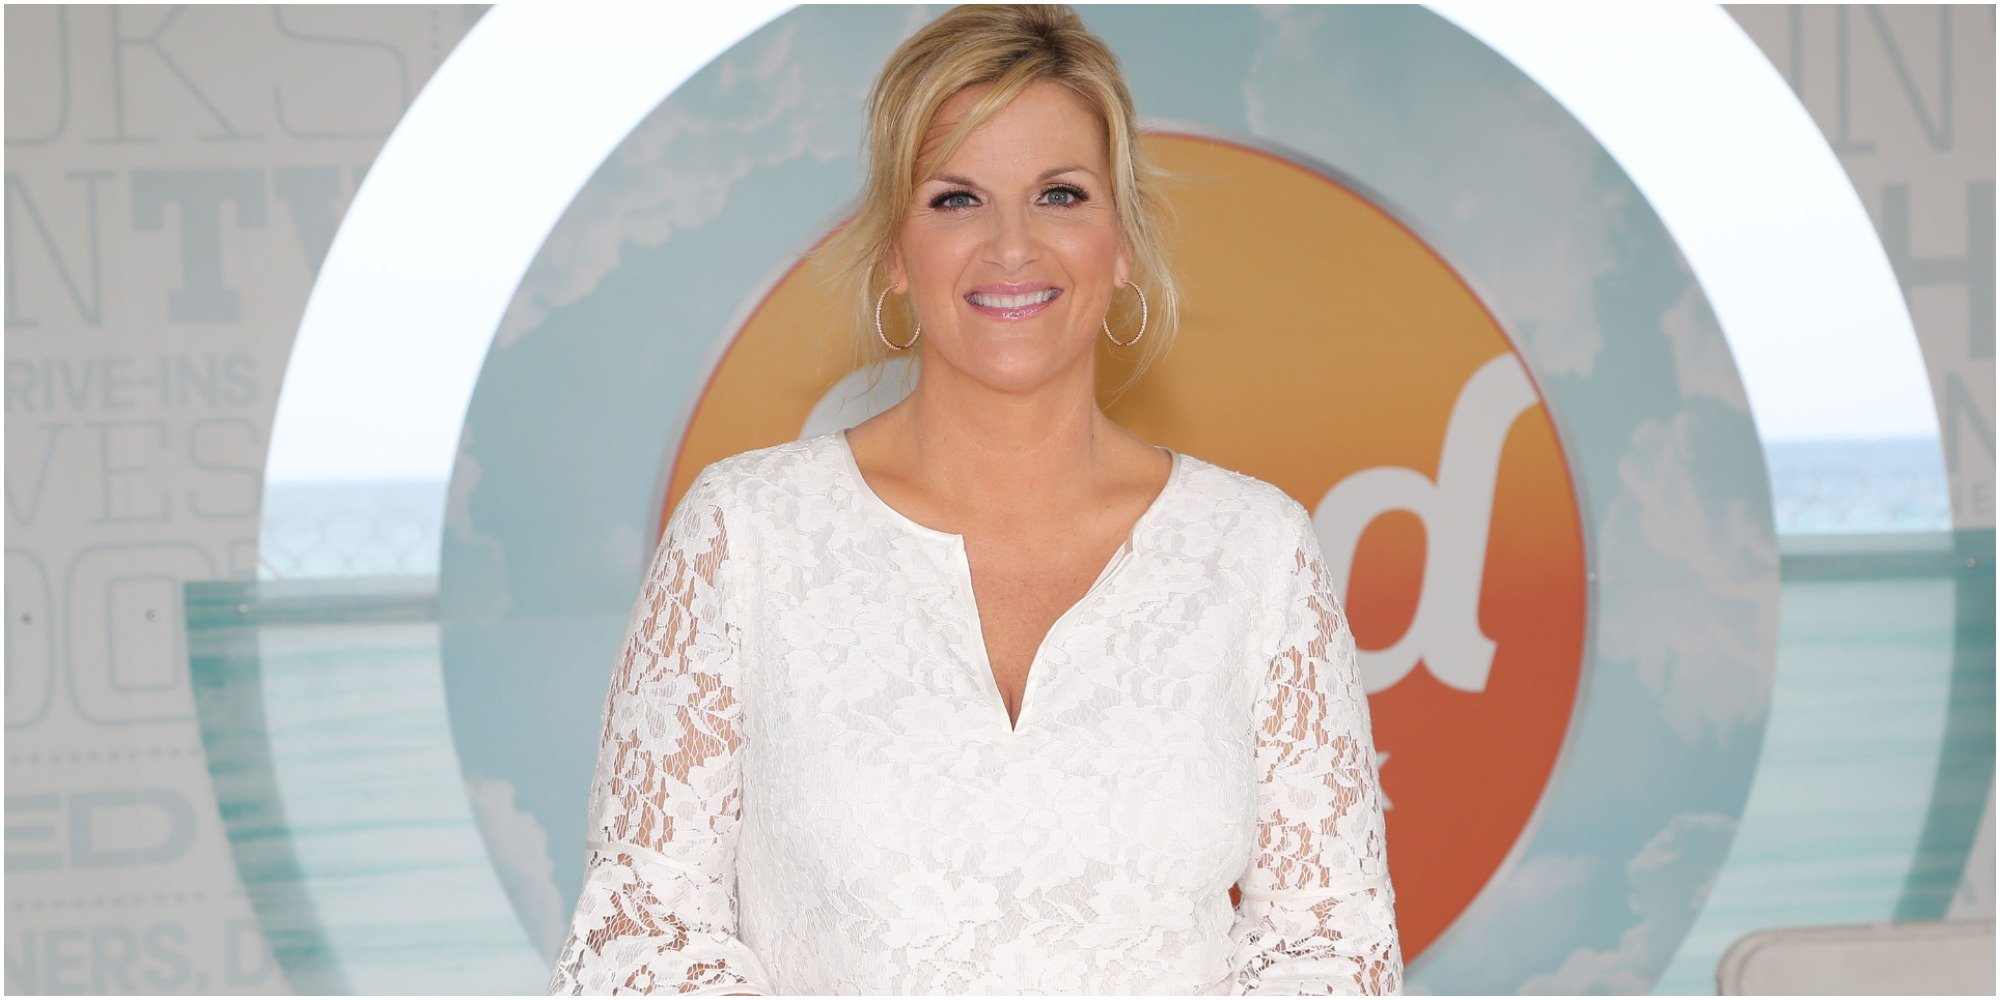 Trisha Yearwood poses in front of the Food Network logo.